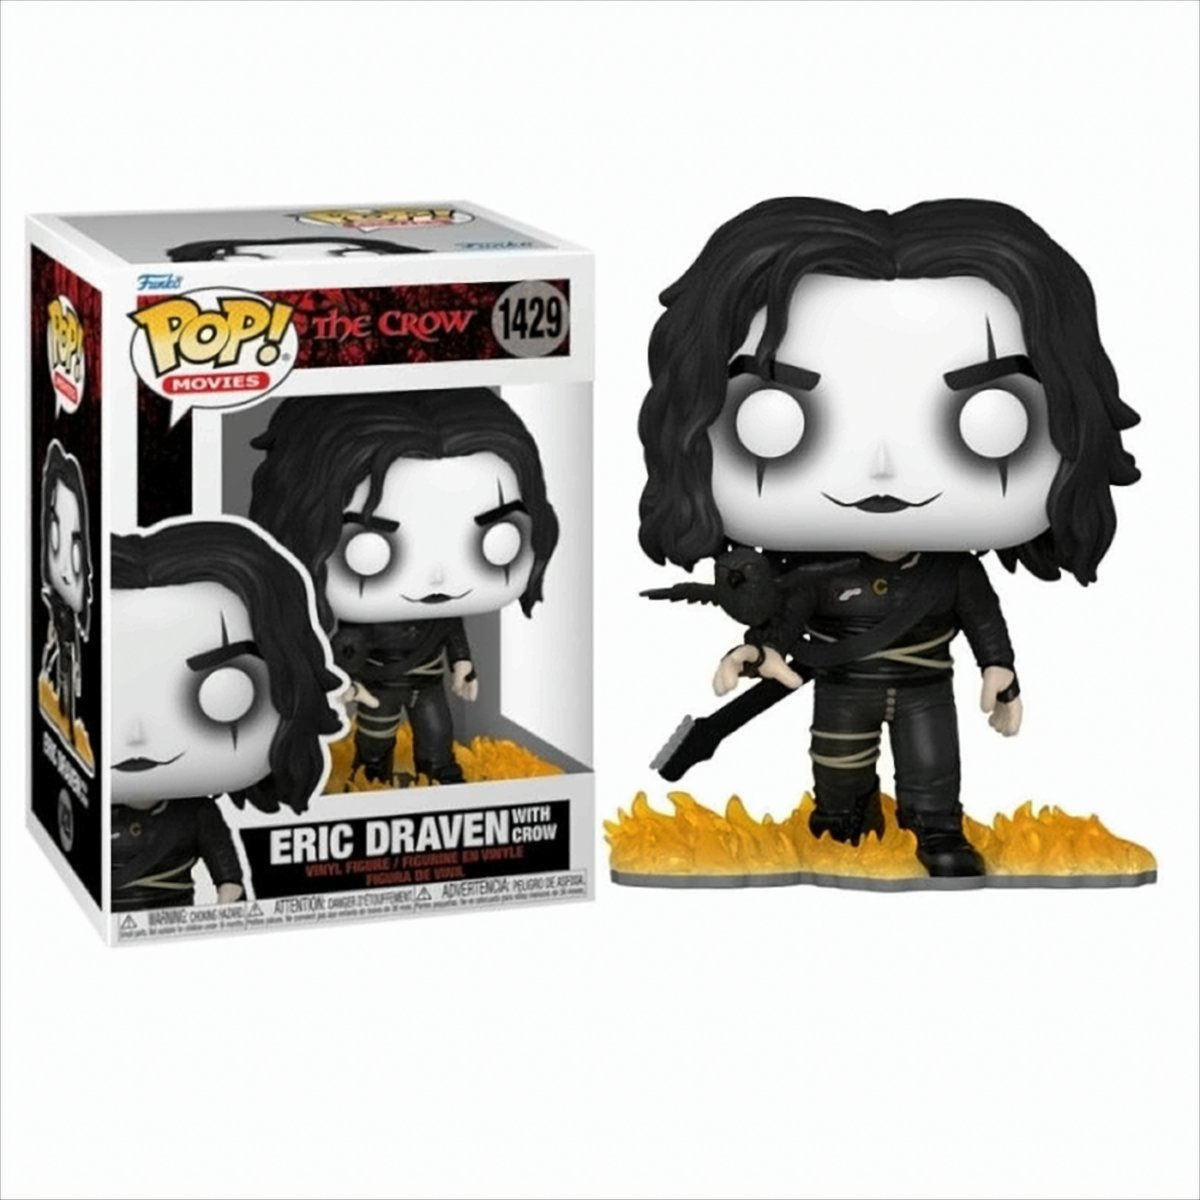 Eric - Crow Draven with Crow POP The